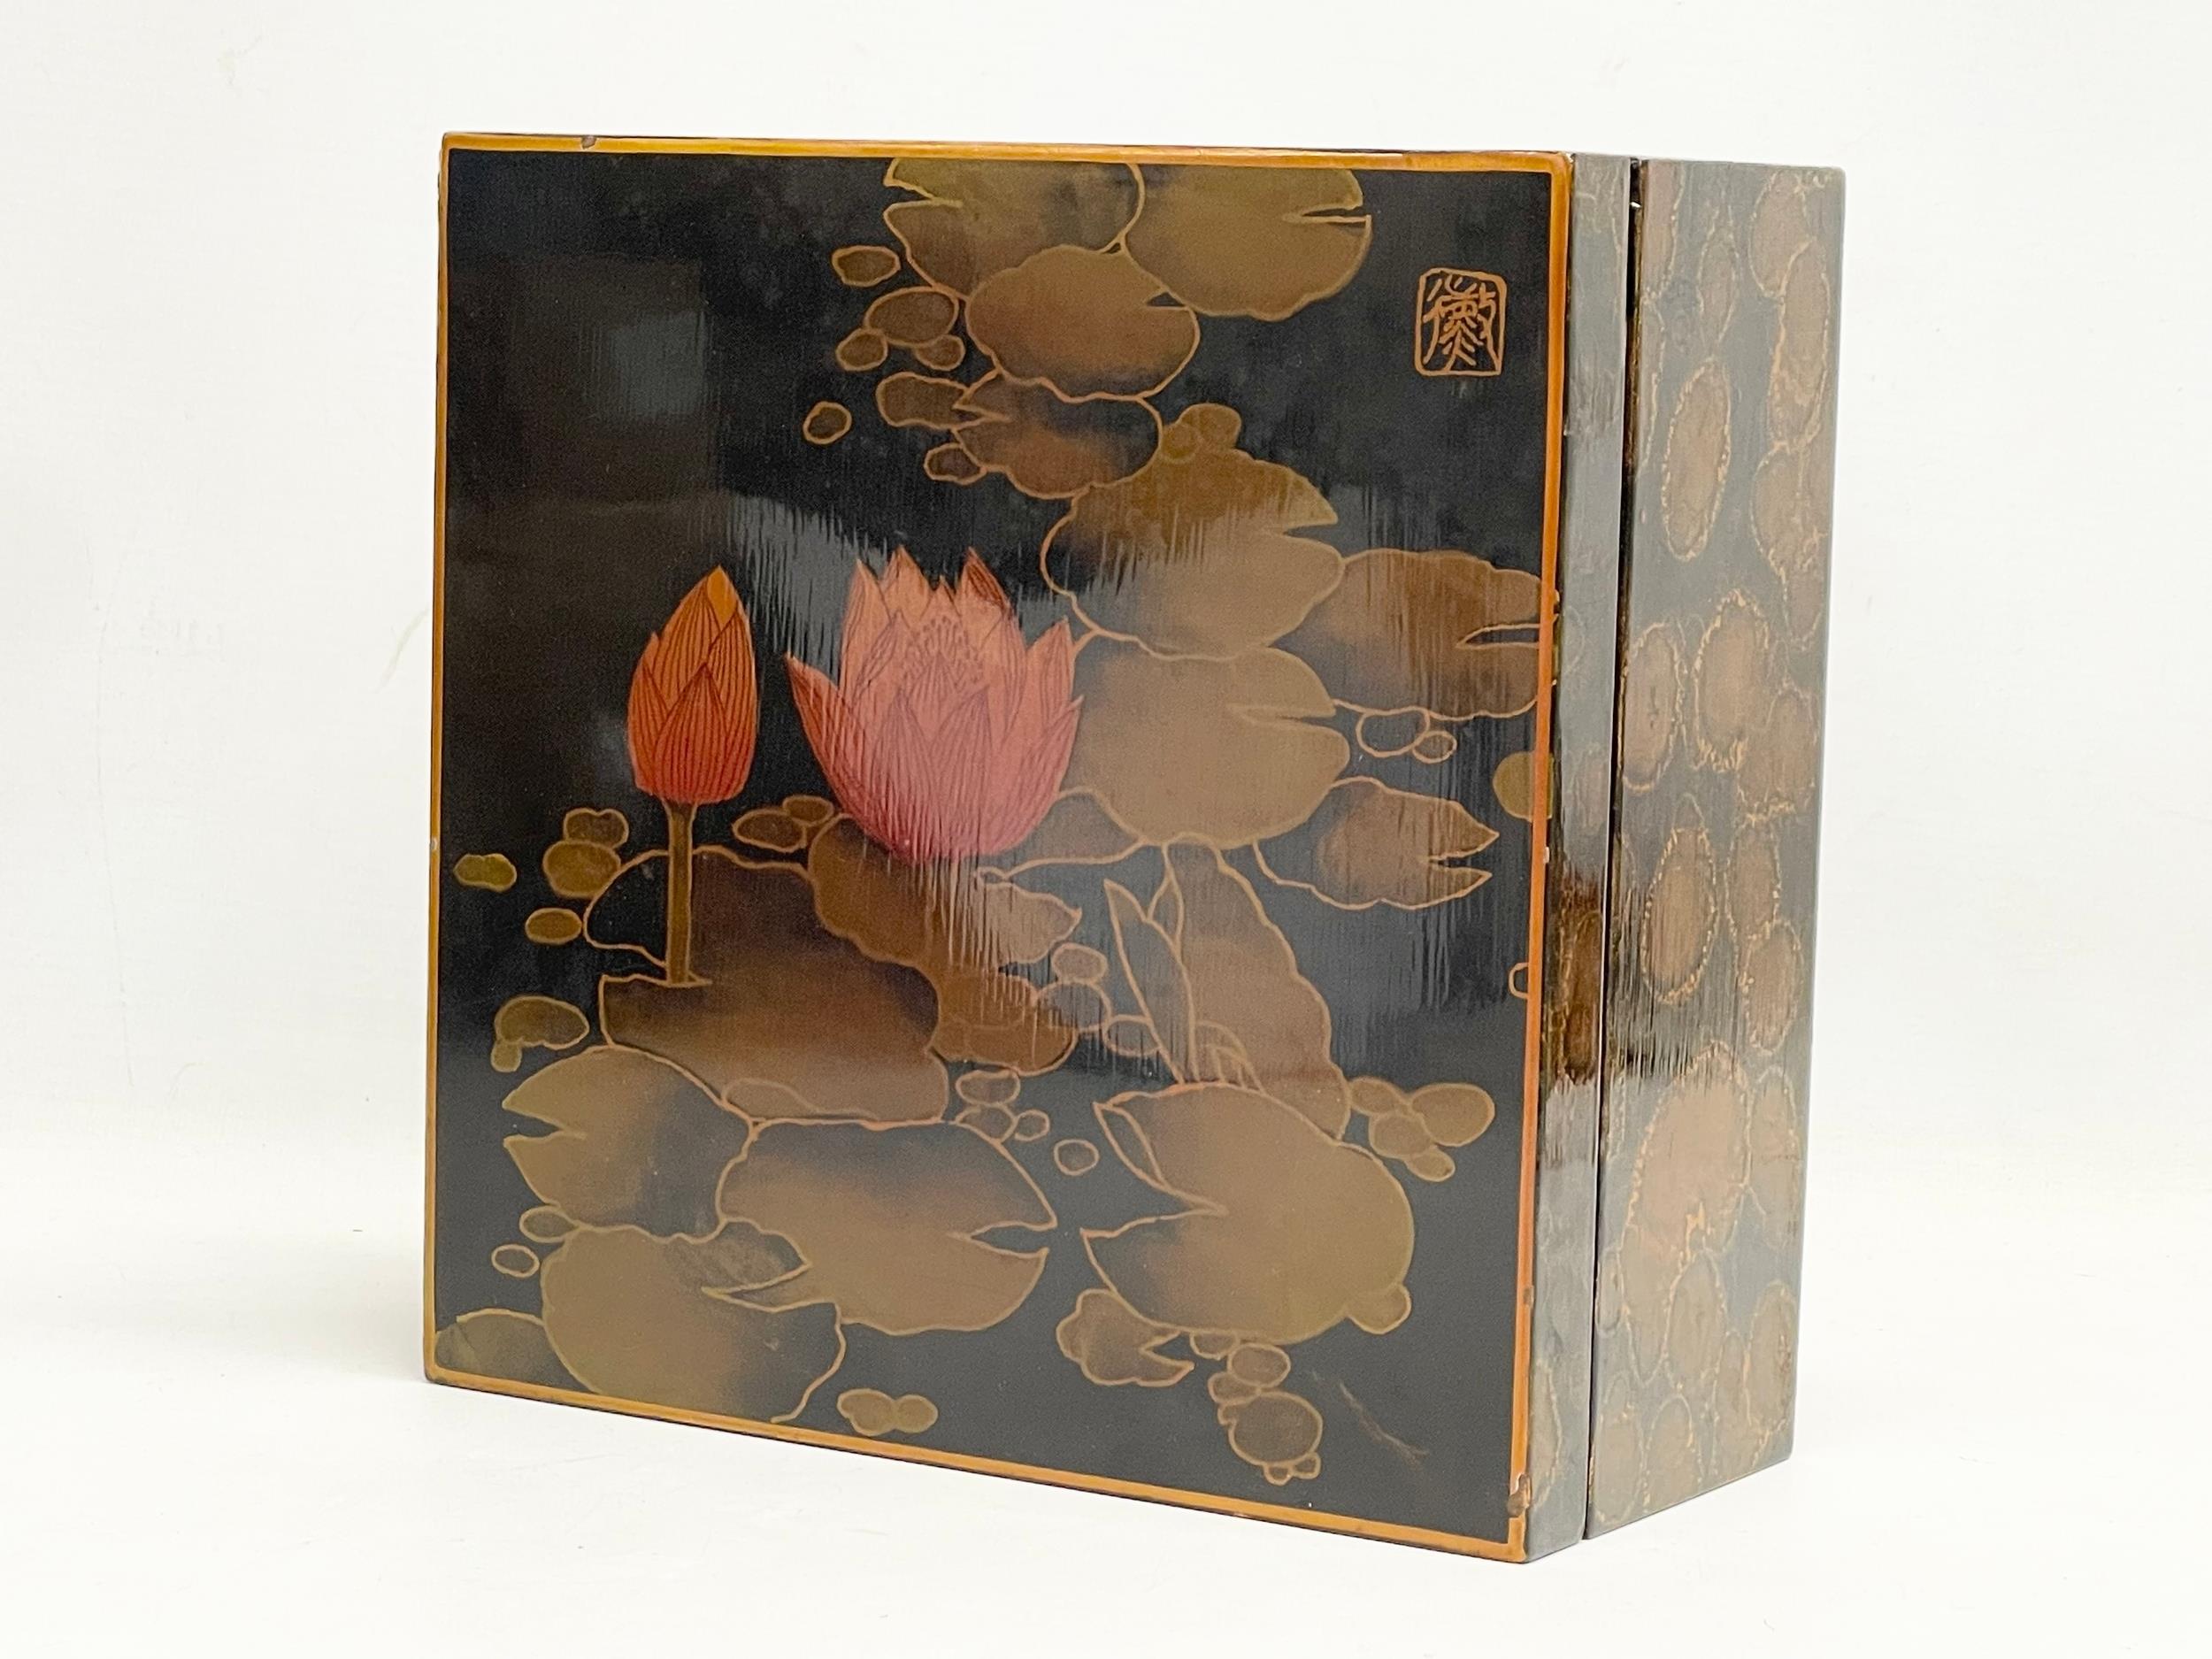 A vintage Japanese lacquered box. 22.5x22.5x10.5cm - Image 3 of 4